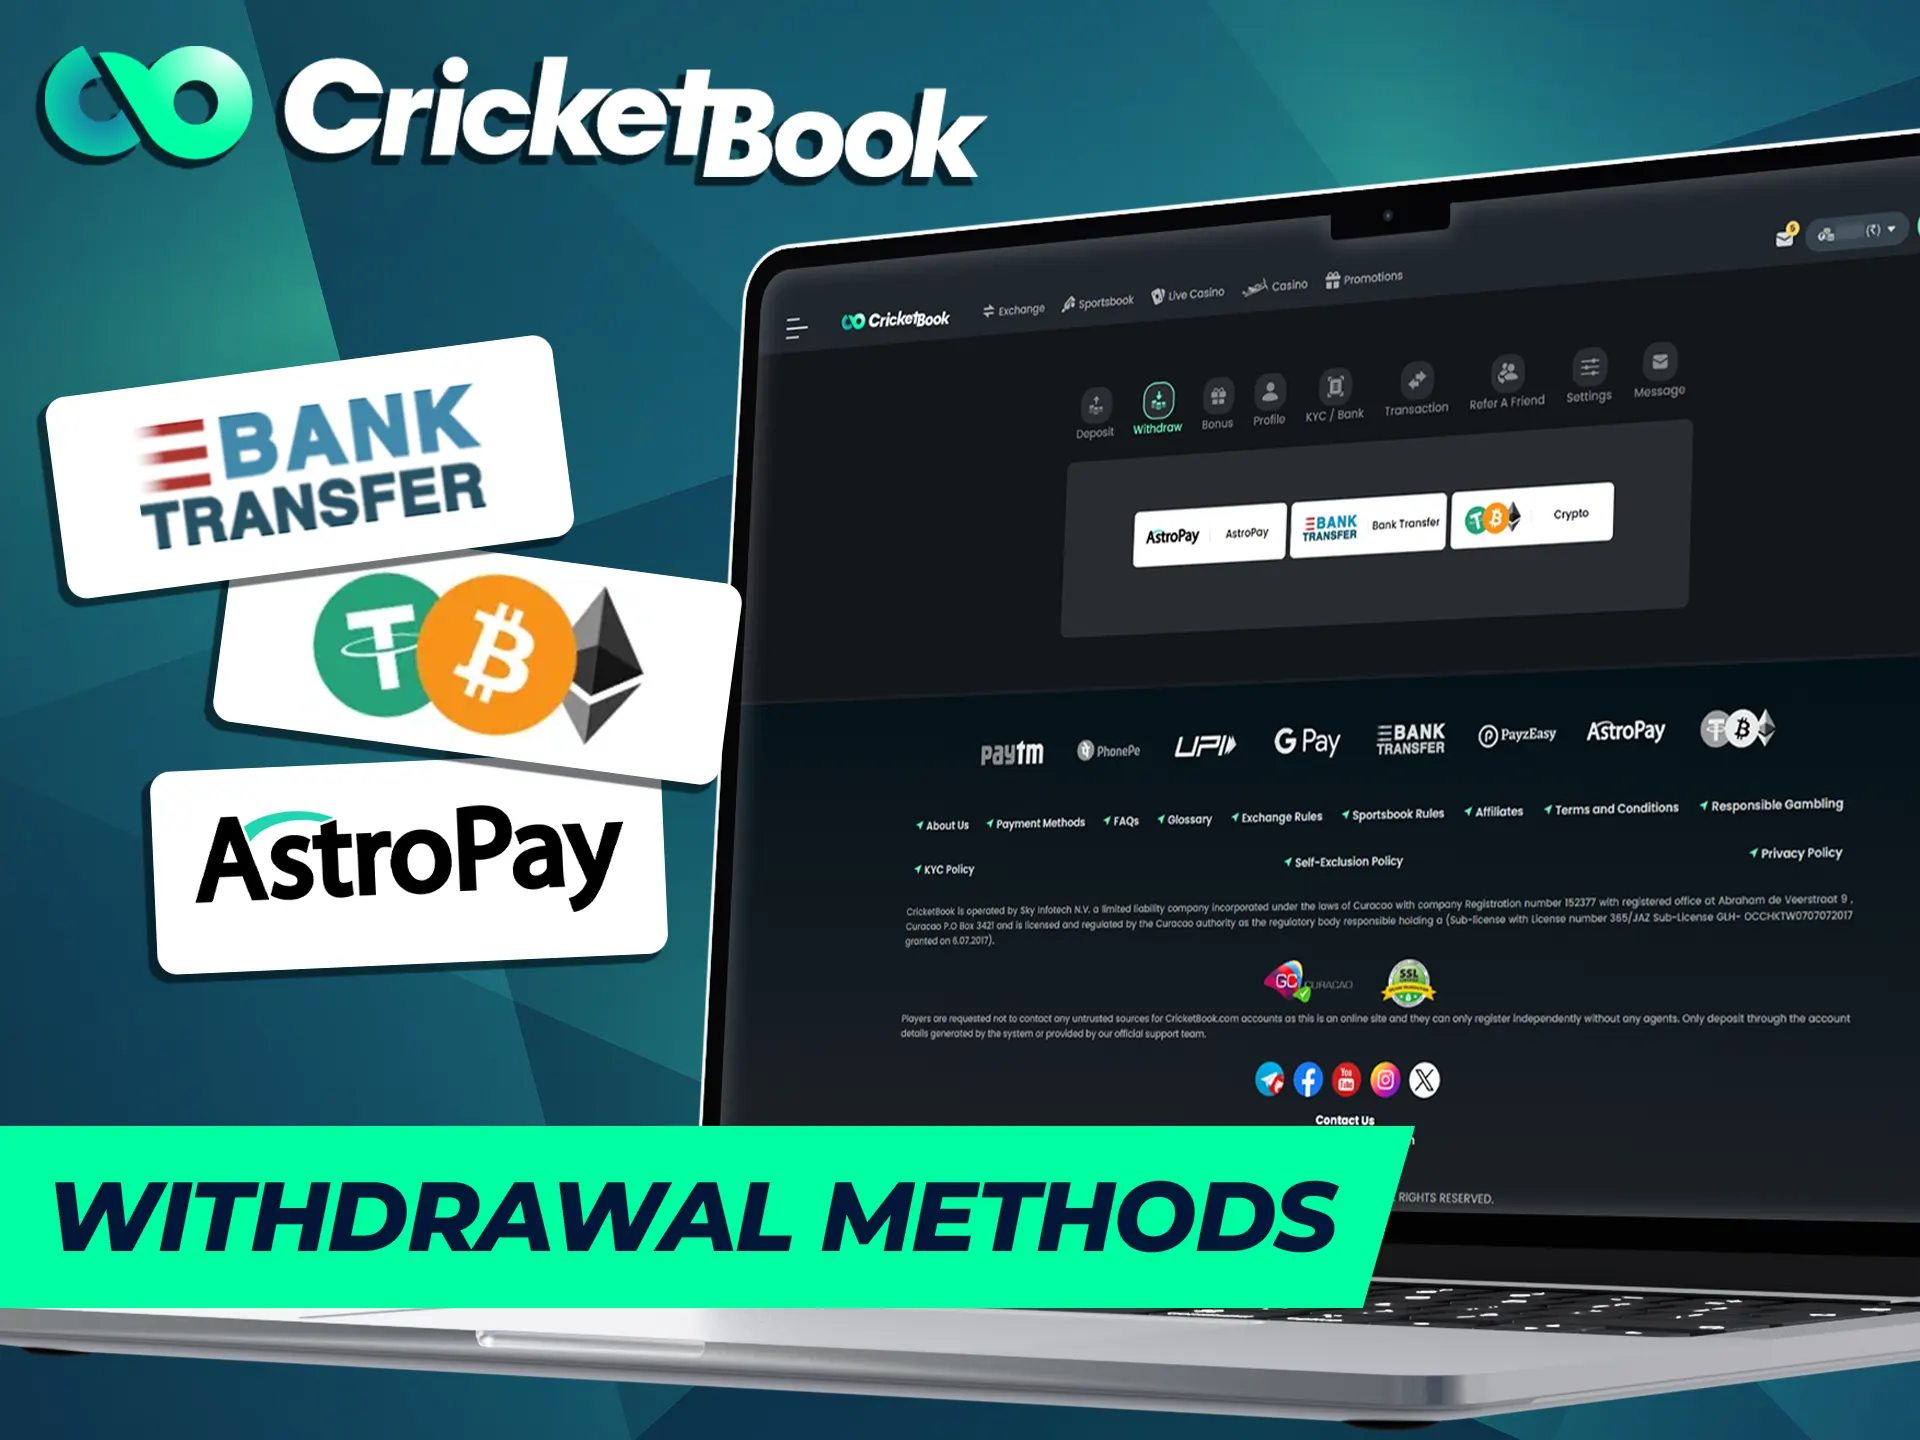 CricketBook has several reliable withdrawal methods.